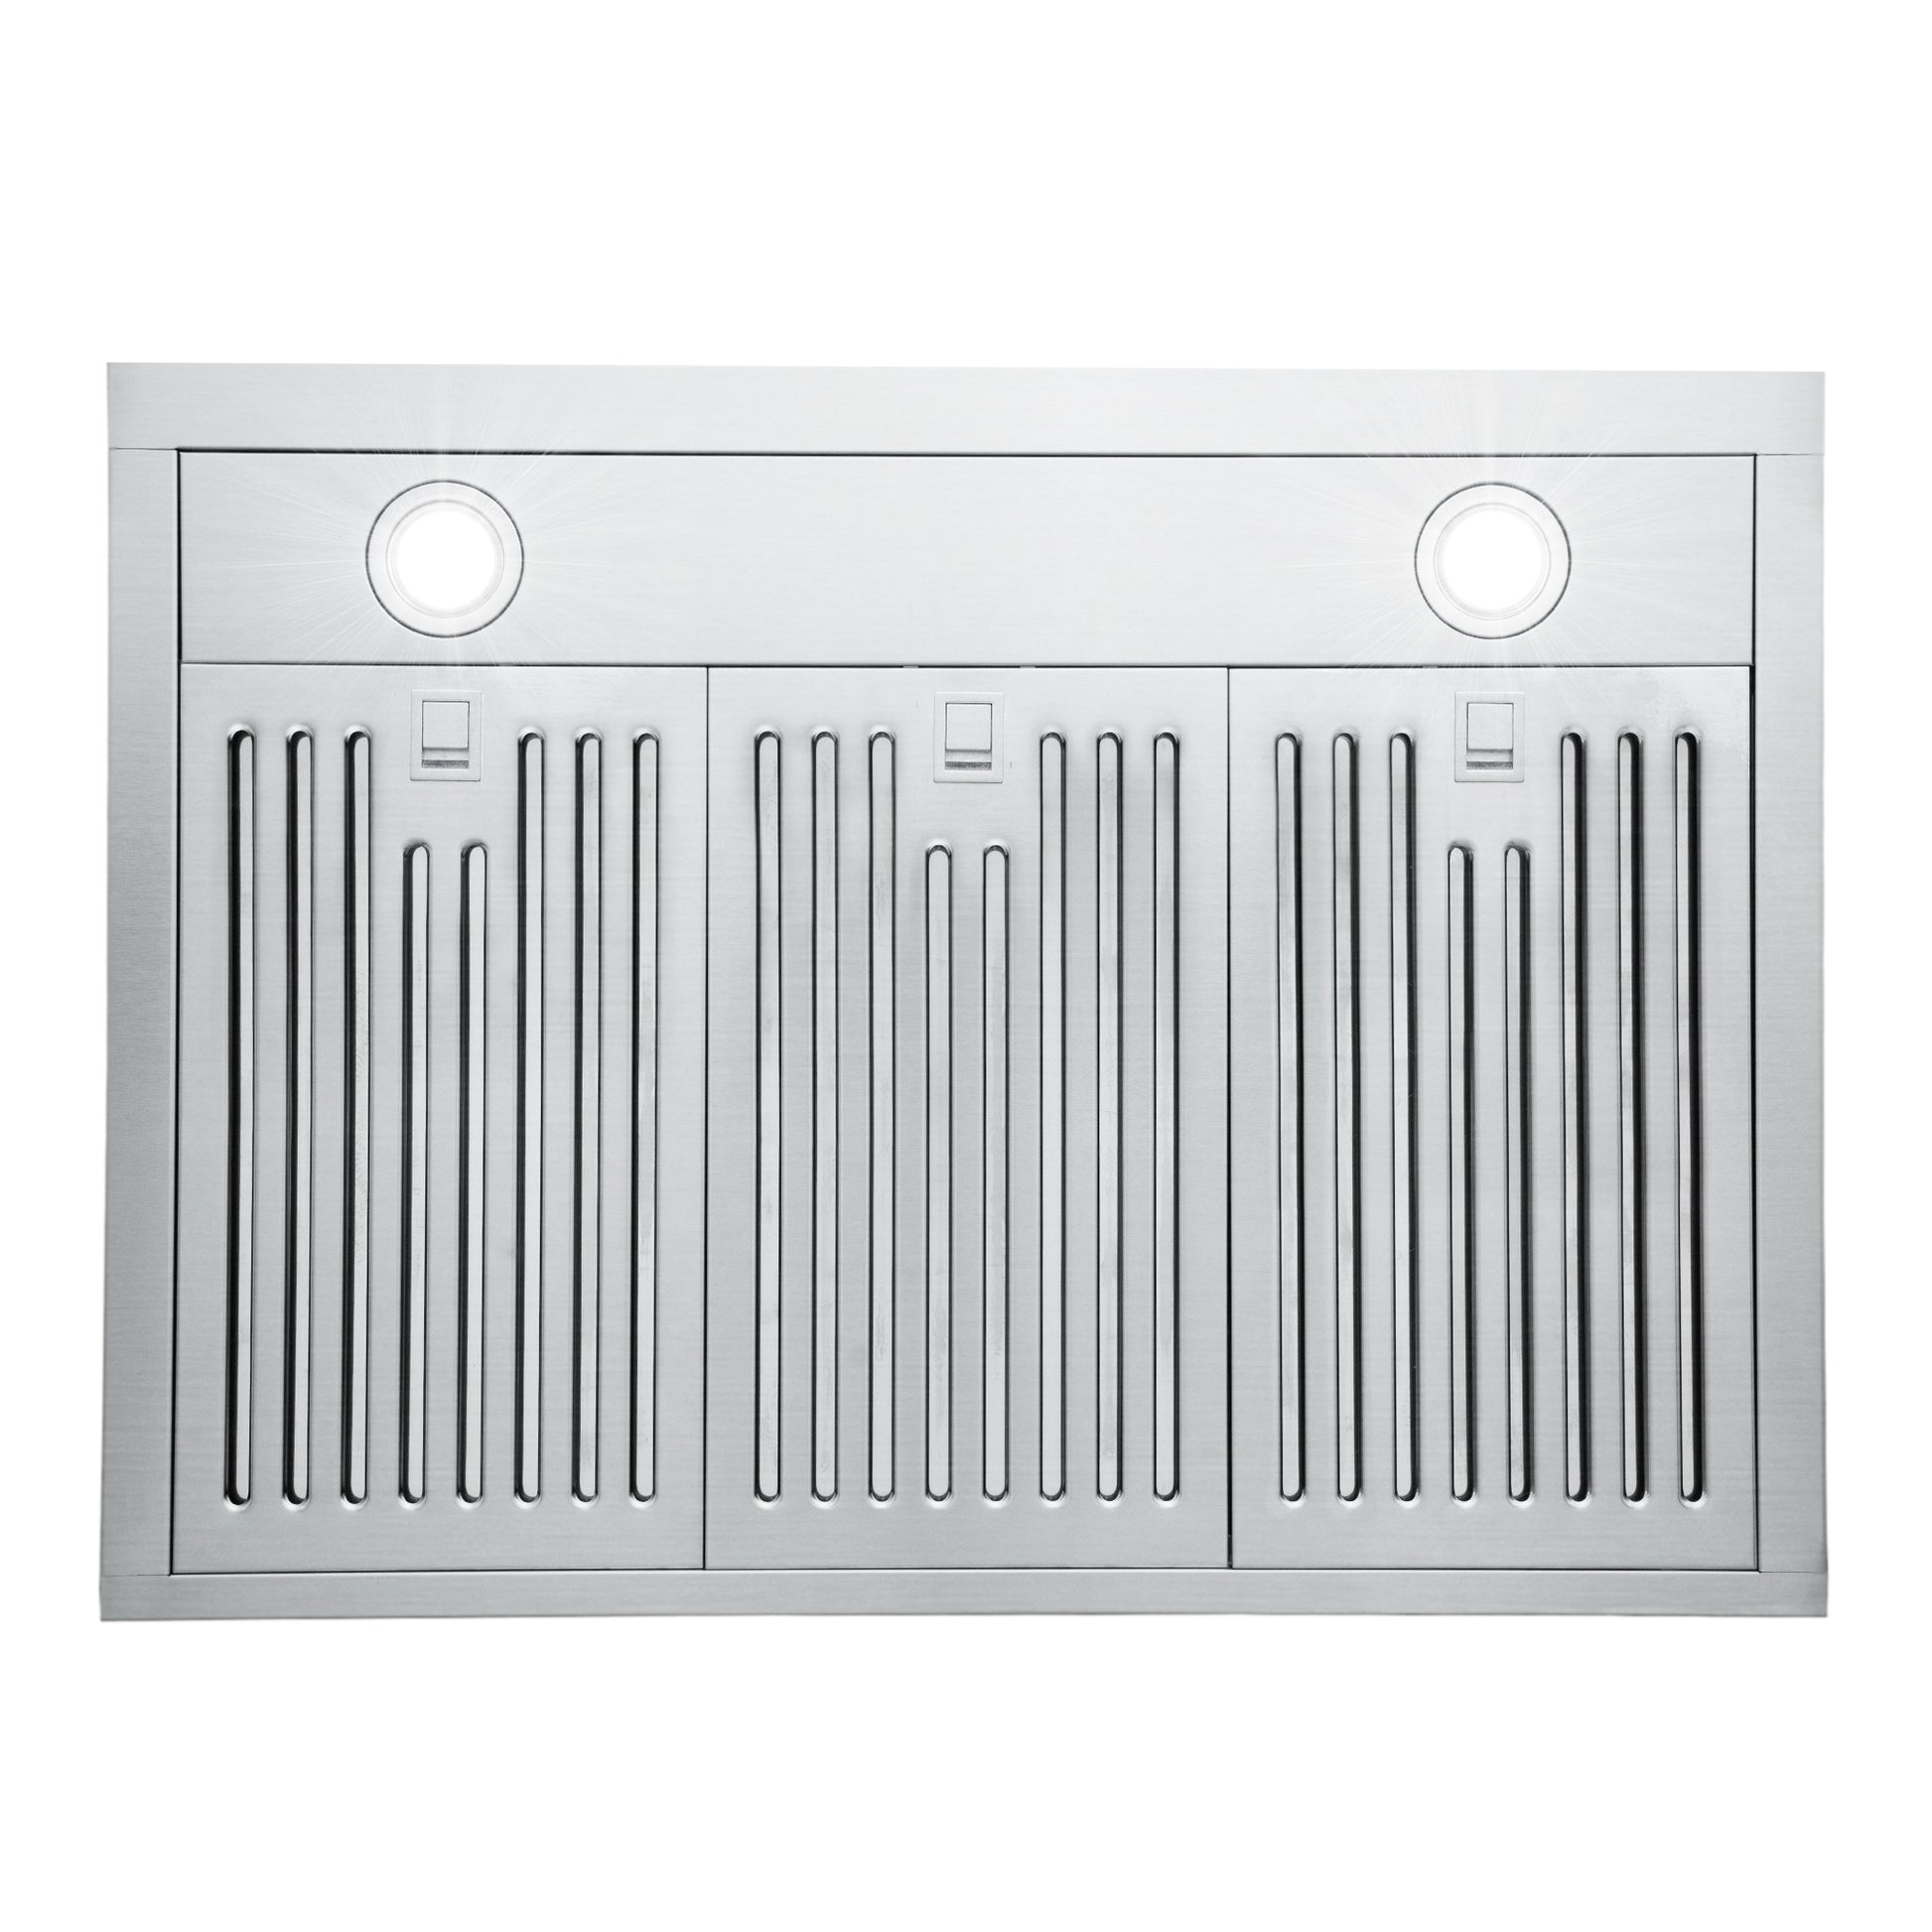 Cosmo 30 in. Stainless Steel Under Cabinet Range Hood with Digital Touch Controls, 3-Speed Fan, LED Lights and Permanent Filters 500 CFM